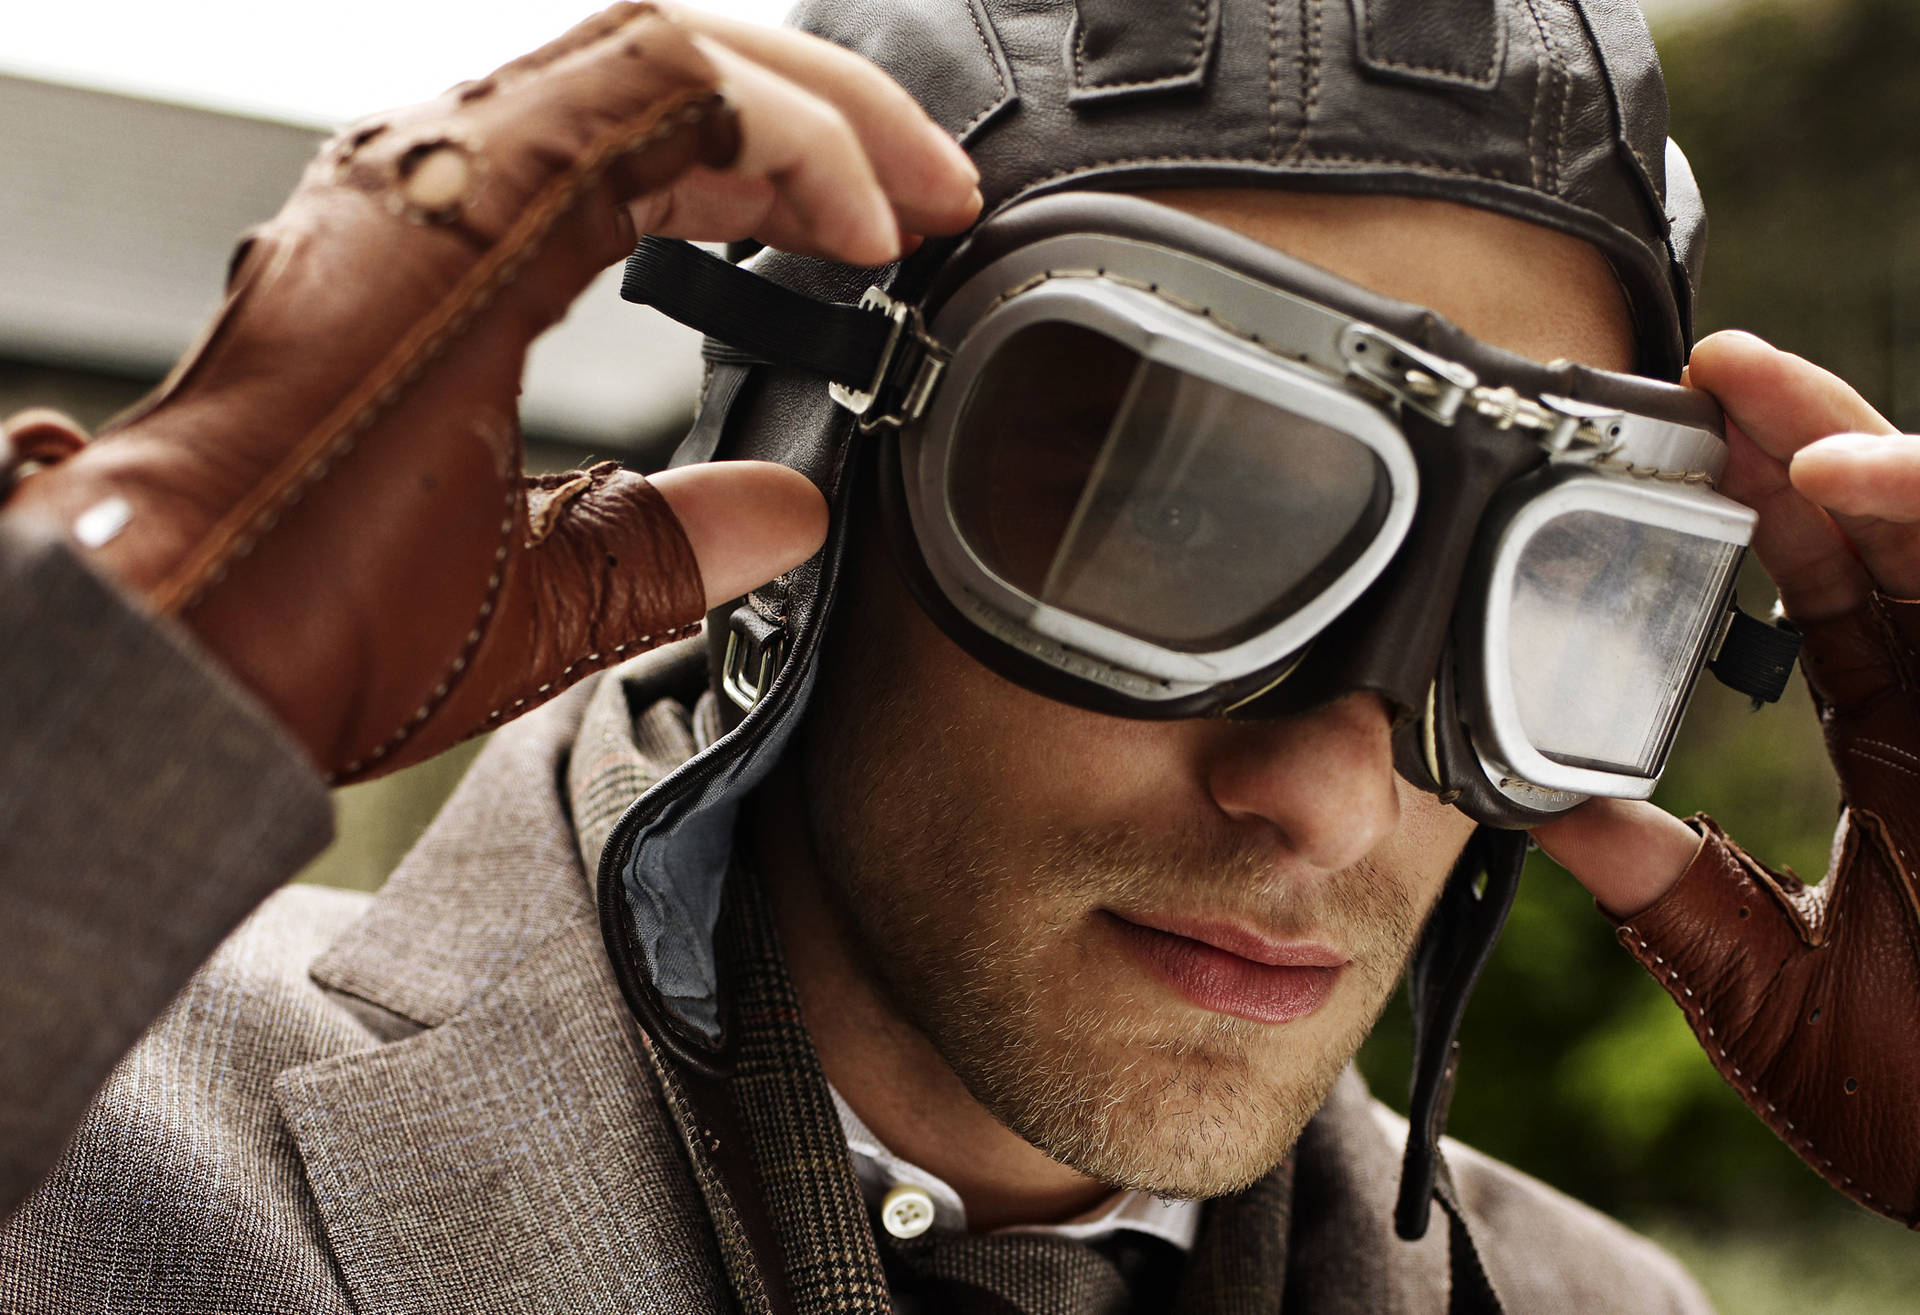 Man Wearing Safety Goggles Wallpaper